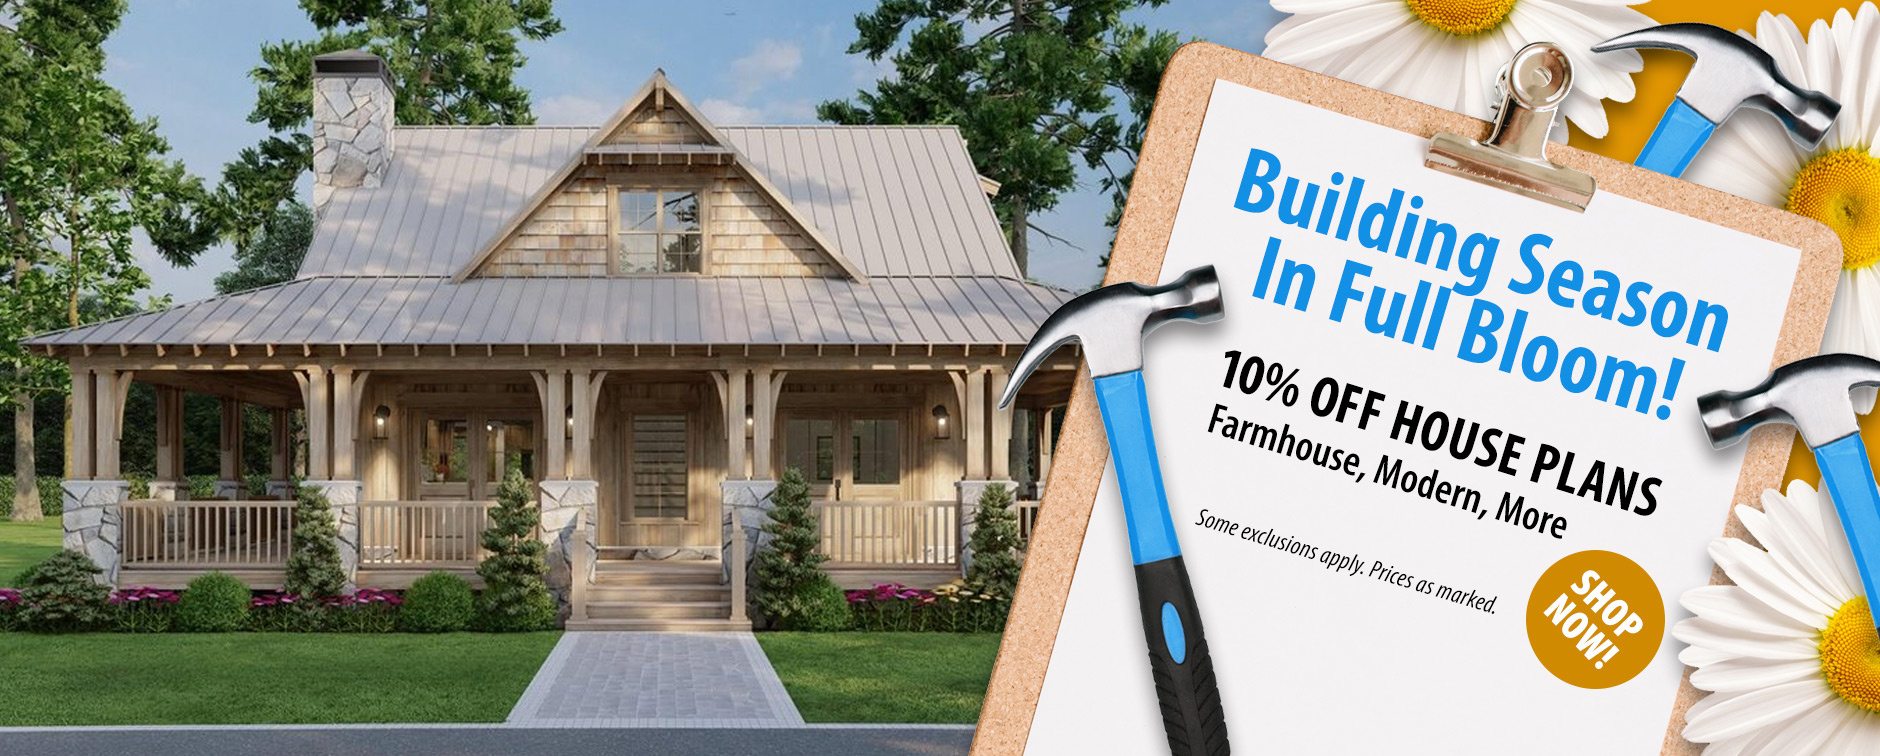 Enjoy 10% Off Thousands of House Plans